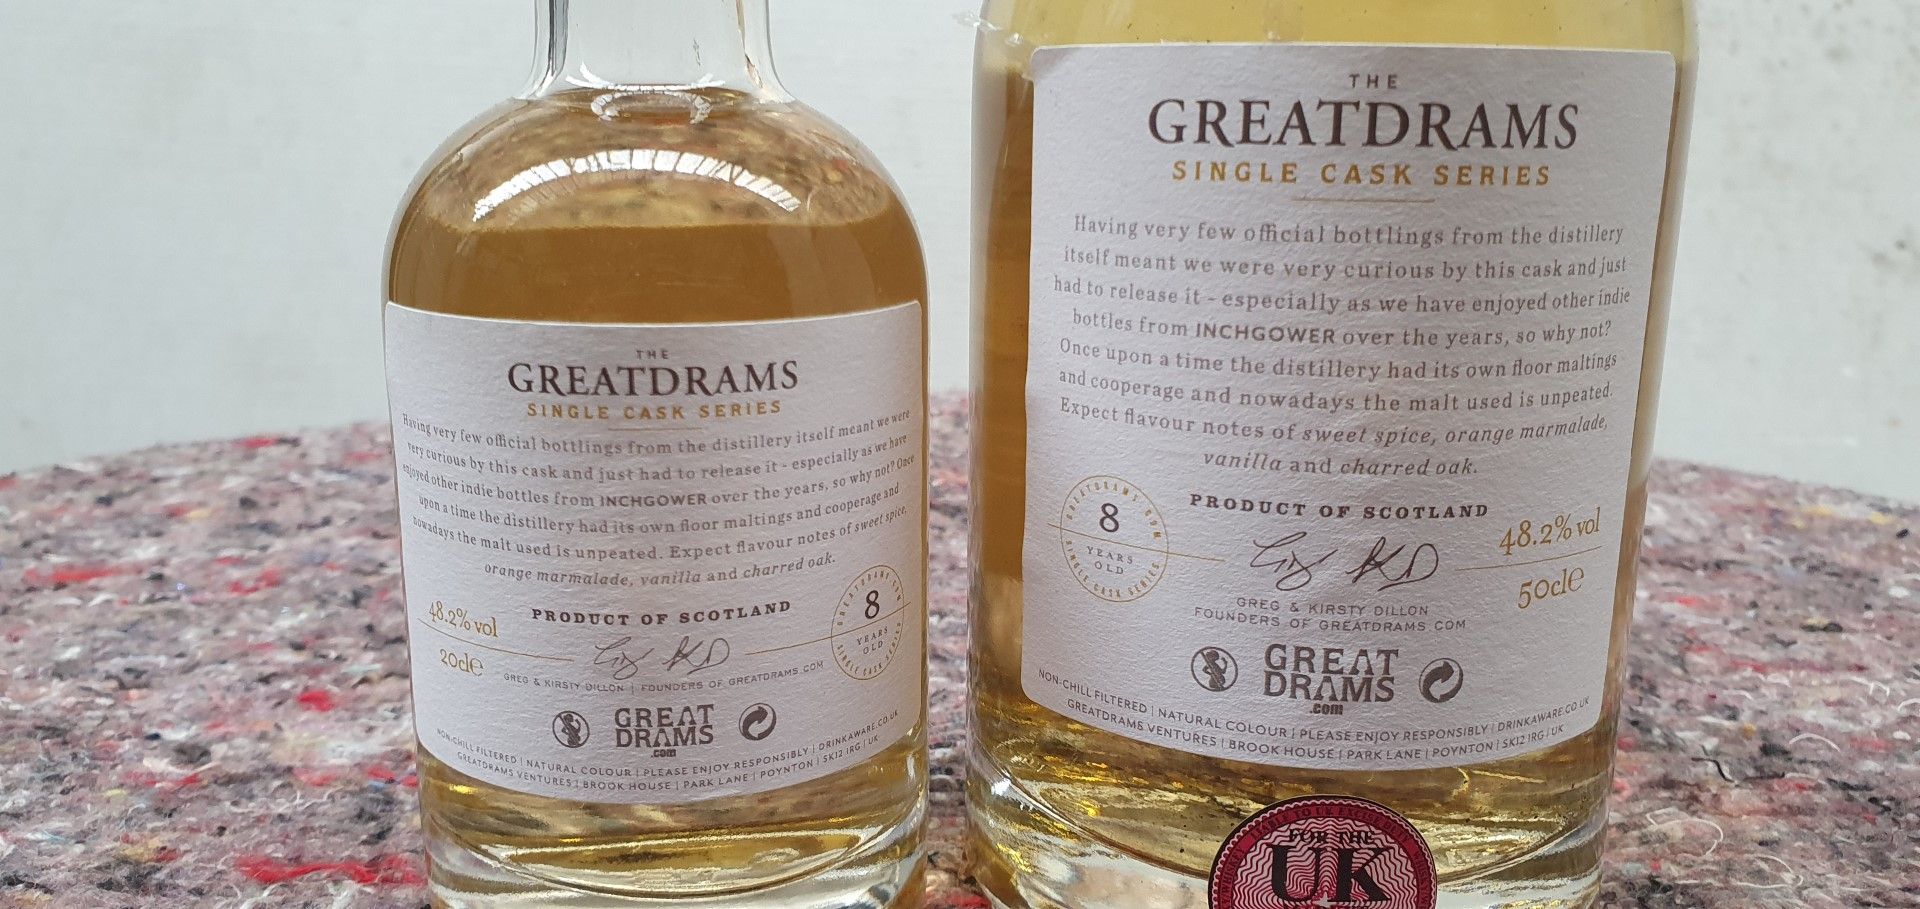 2 x Bottles of Greatdrams Single Cask Series Inchgower Single Malt Scotch Whisky - Includes 20cl and - Image 3 of 4